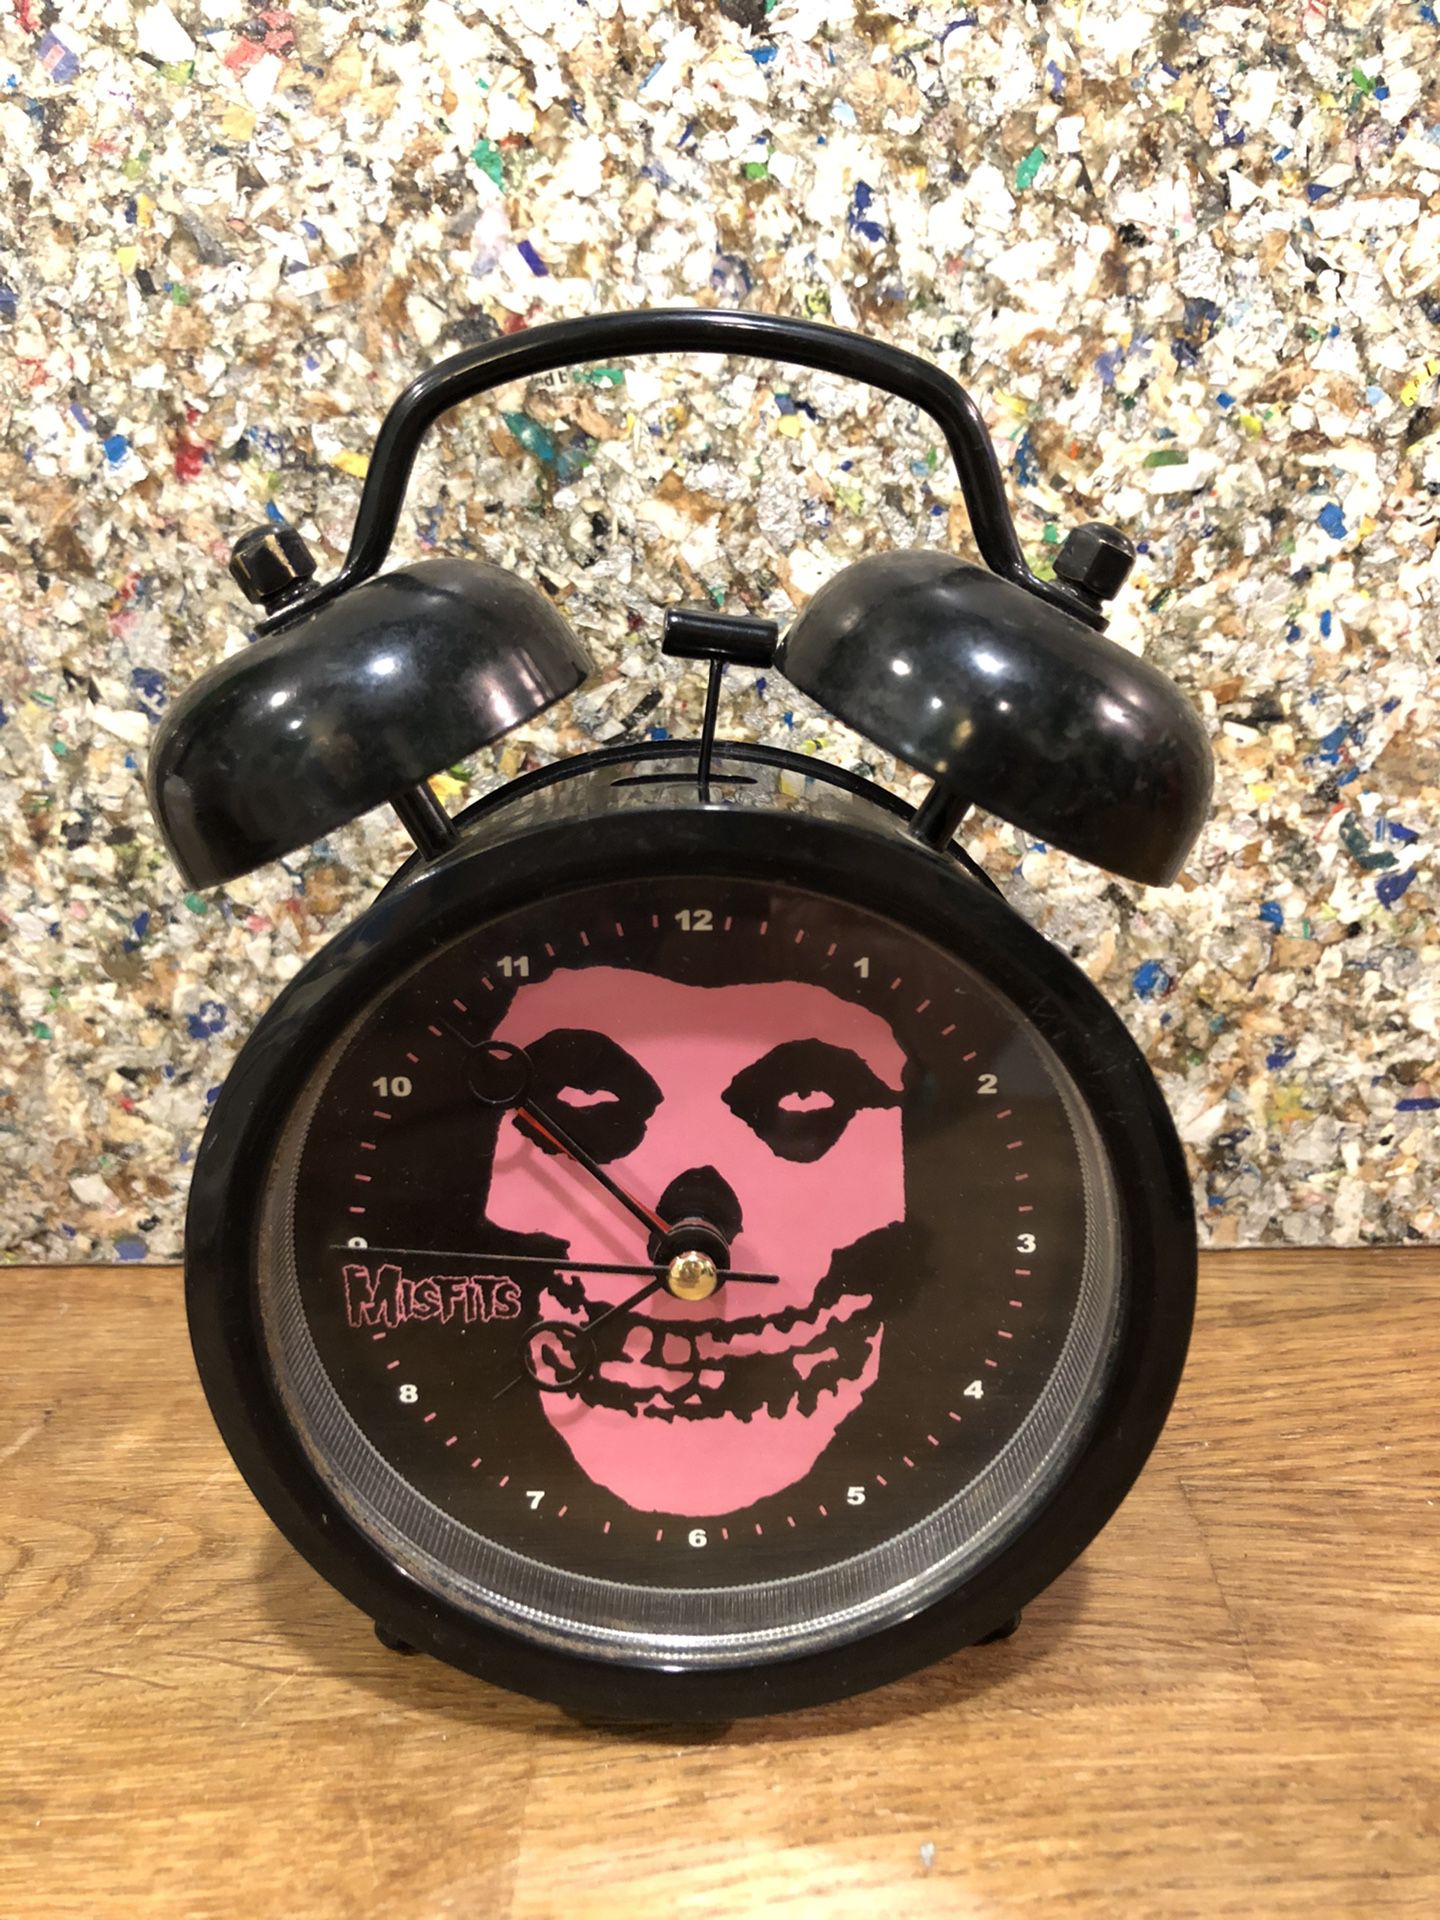 Punk rock wake up call Misfits clock works great with obnoxious bell alarm.